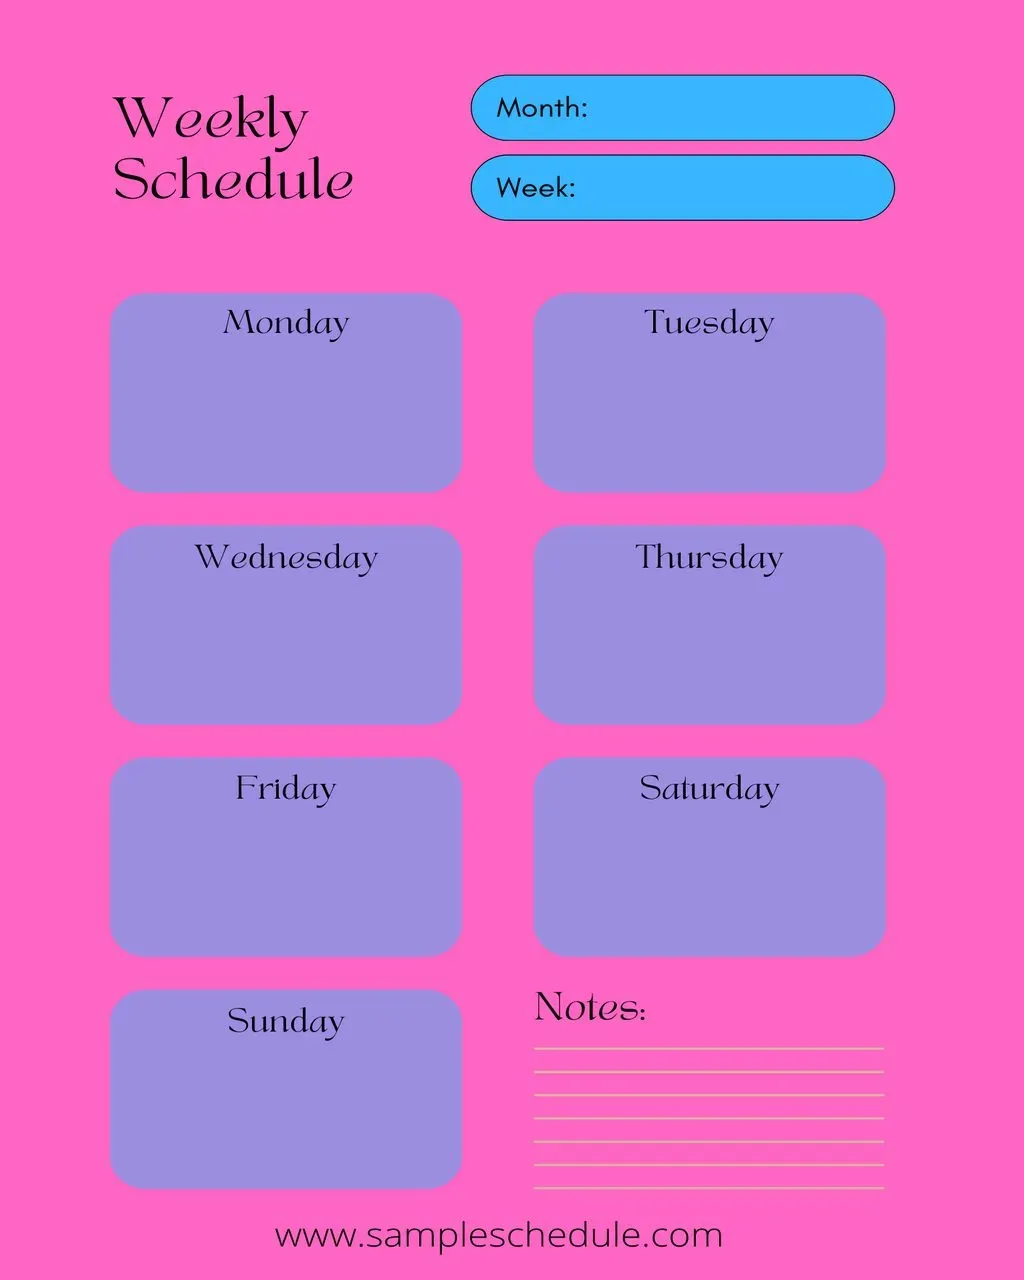 Weekly Schedule Template 09